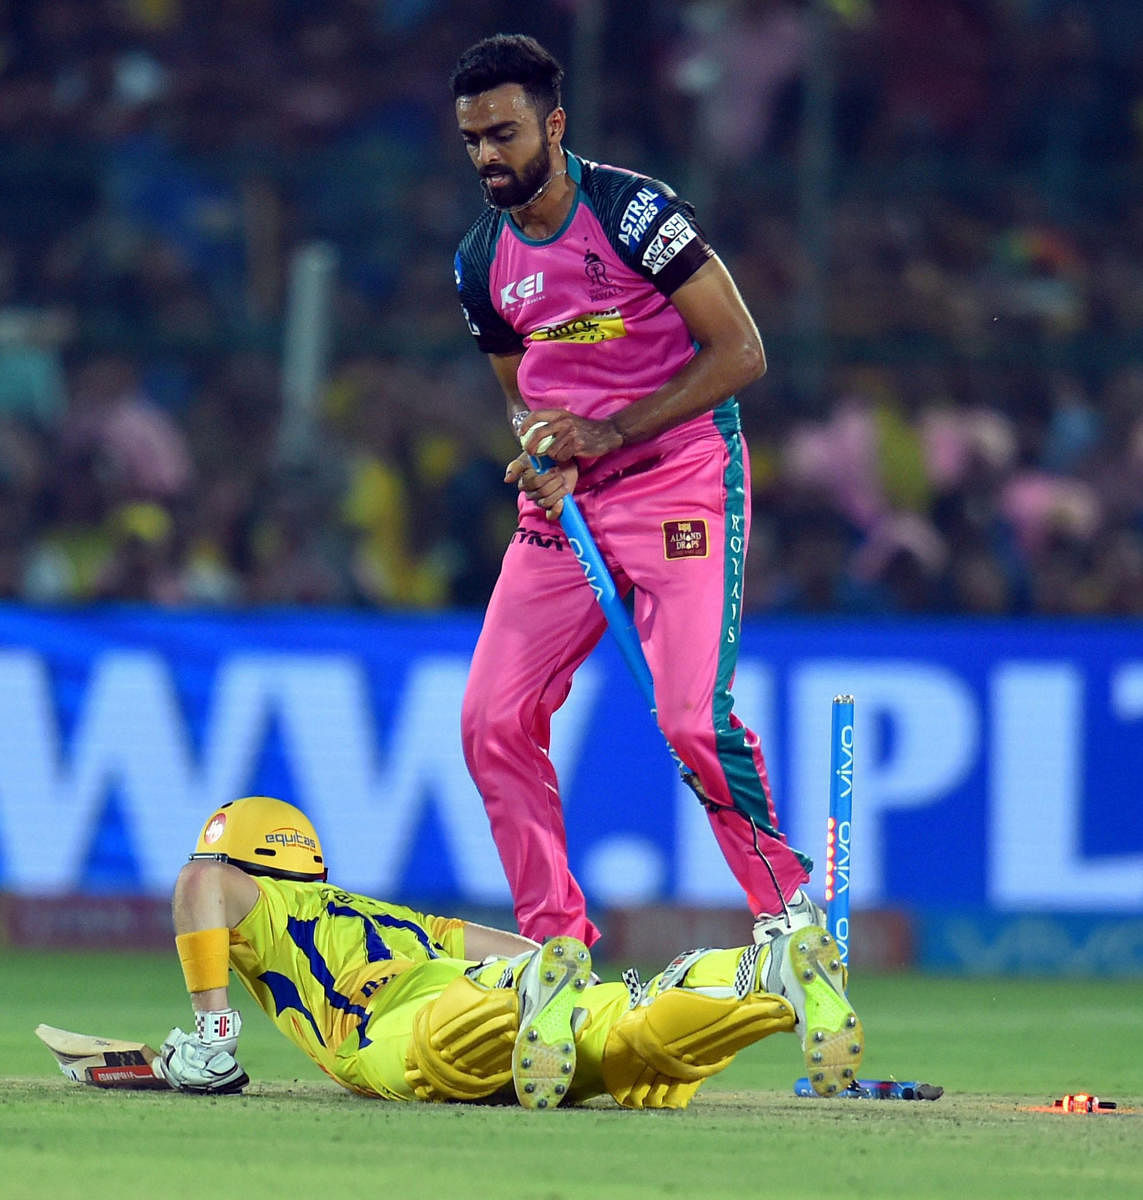 Rajasthan Royals' Jaydev Unadkat has called his team's match against Royal Challengers Bangalore a virtual quarterfinal. PTI 